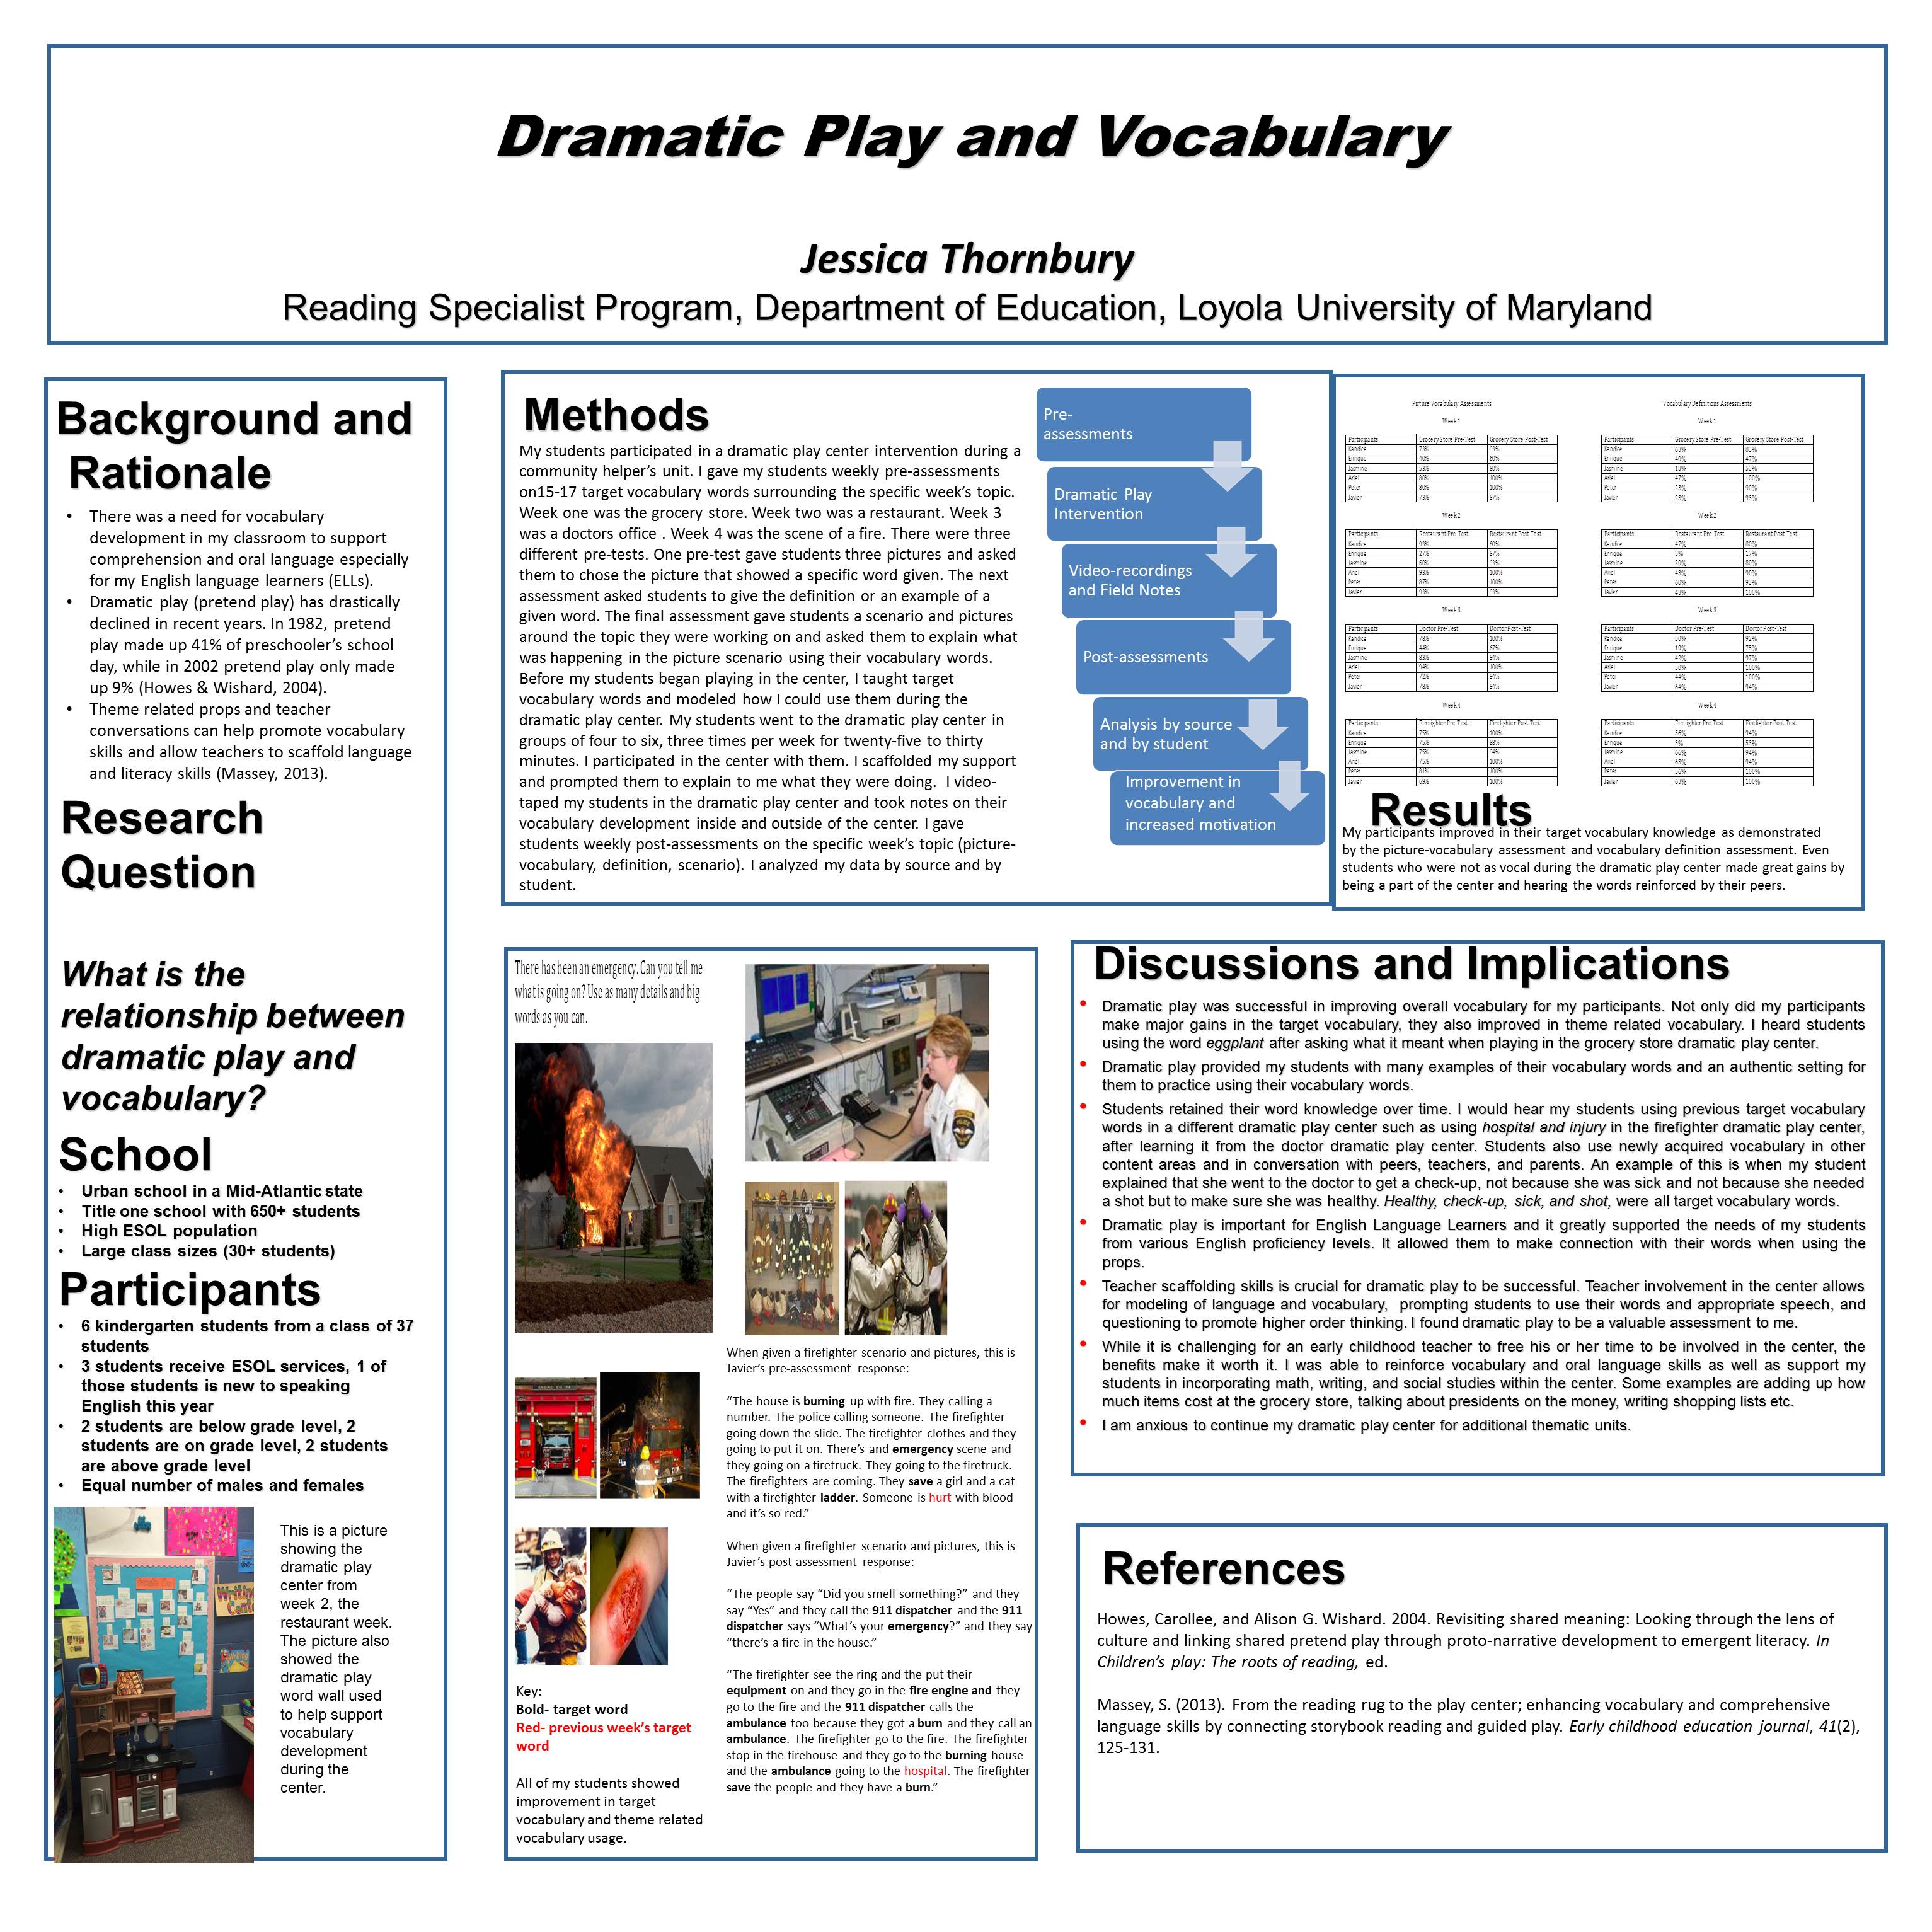 poster image: 'Dramatic Play and Vocabulary Development'